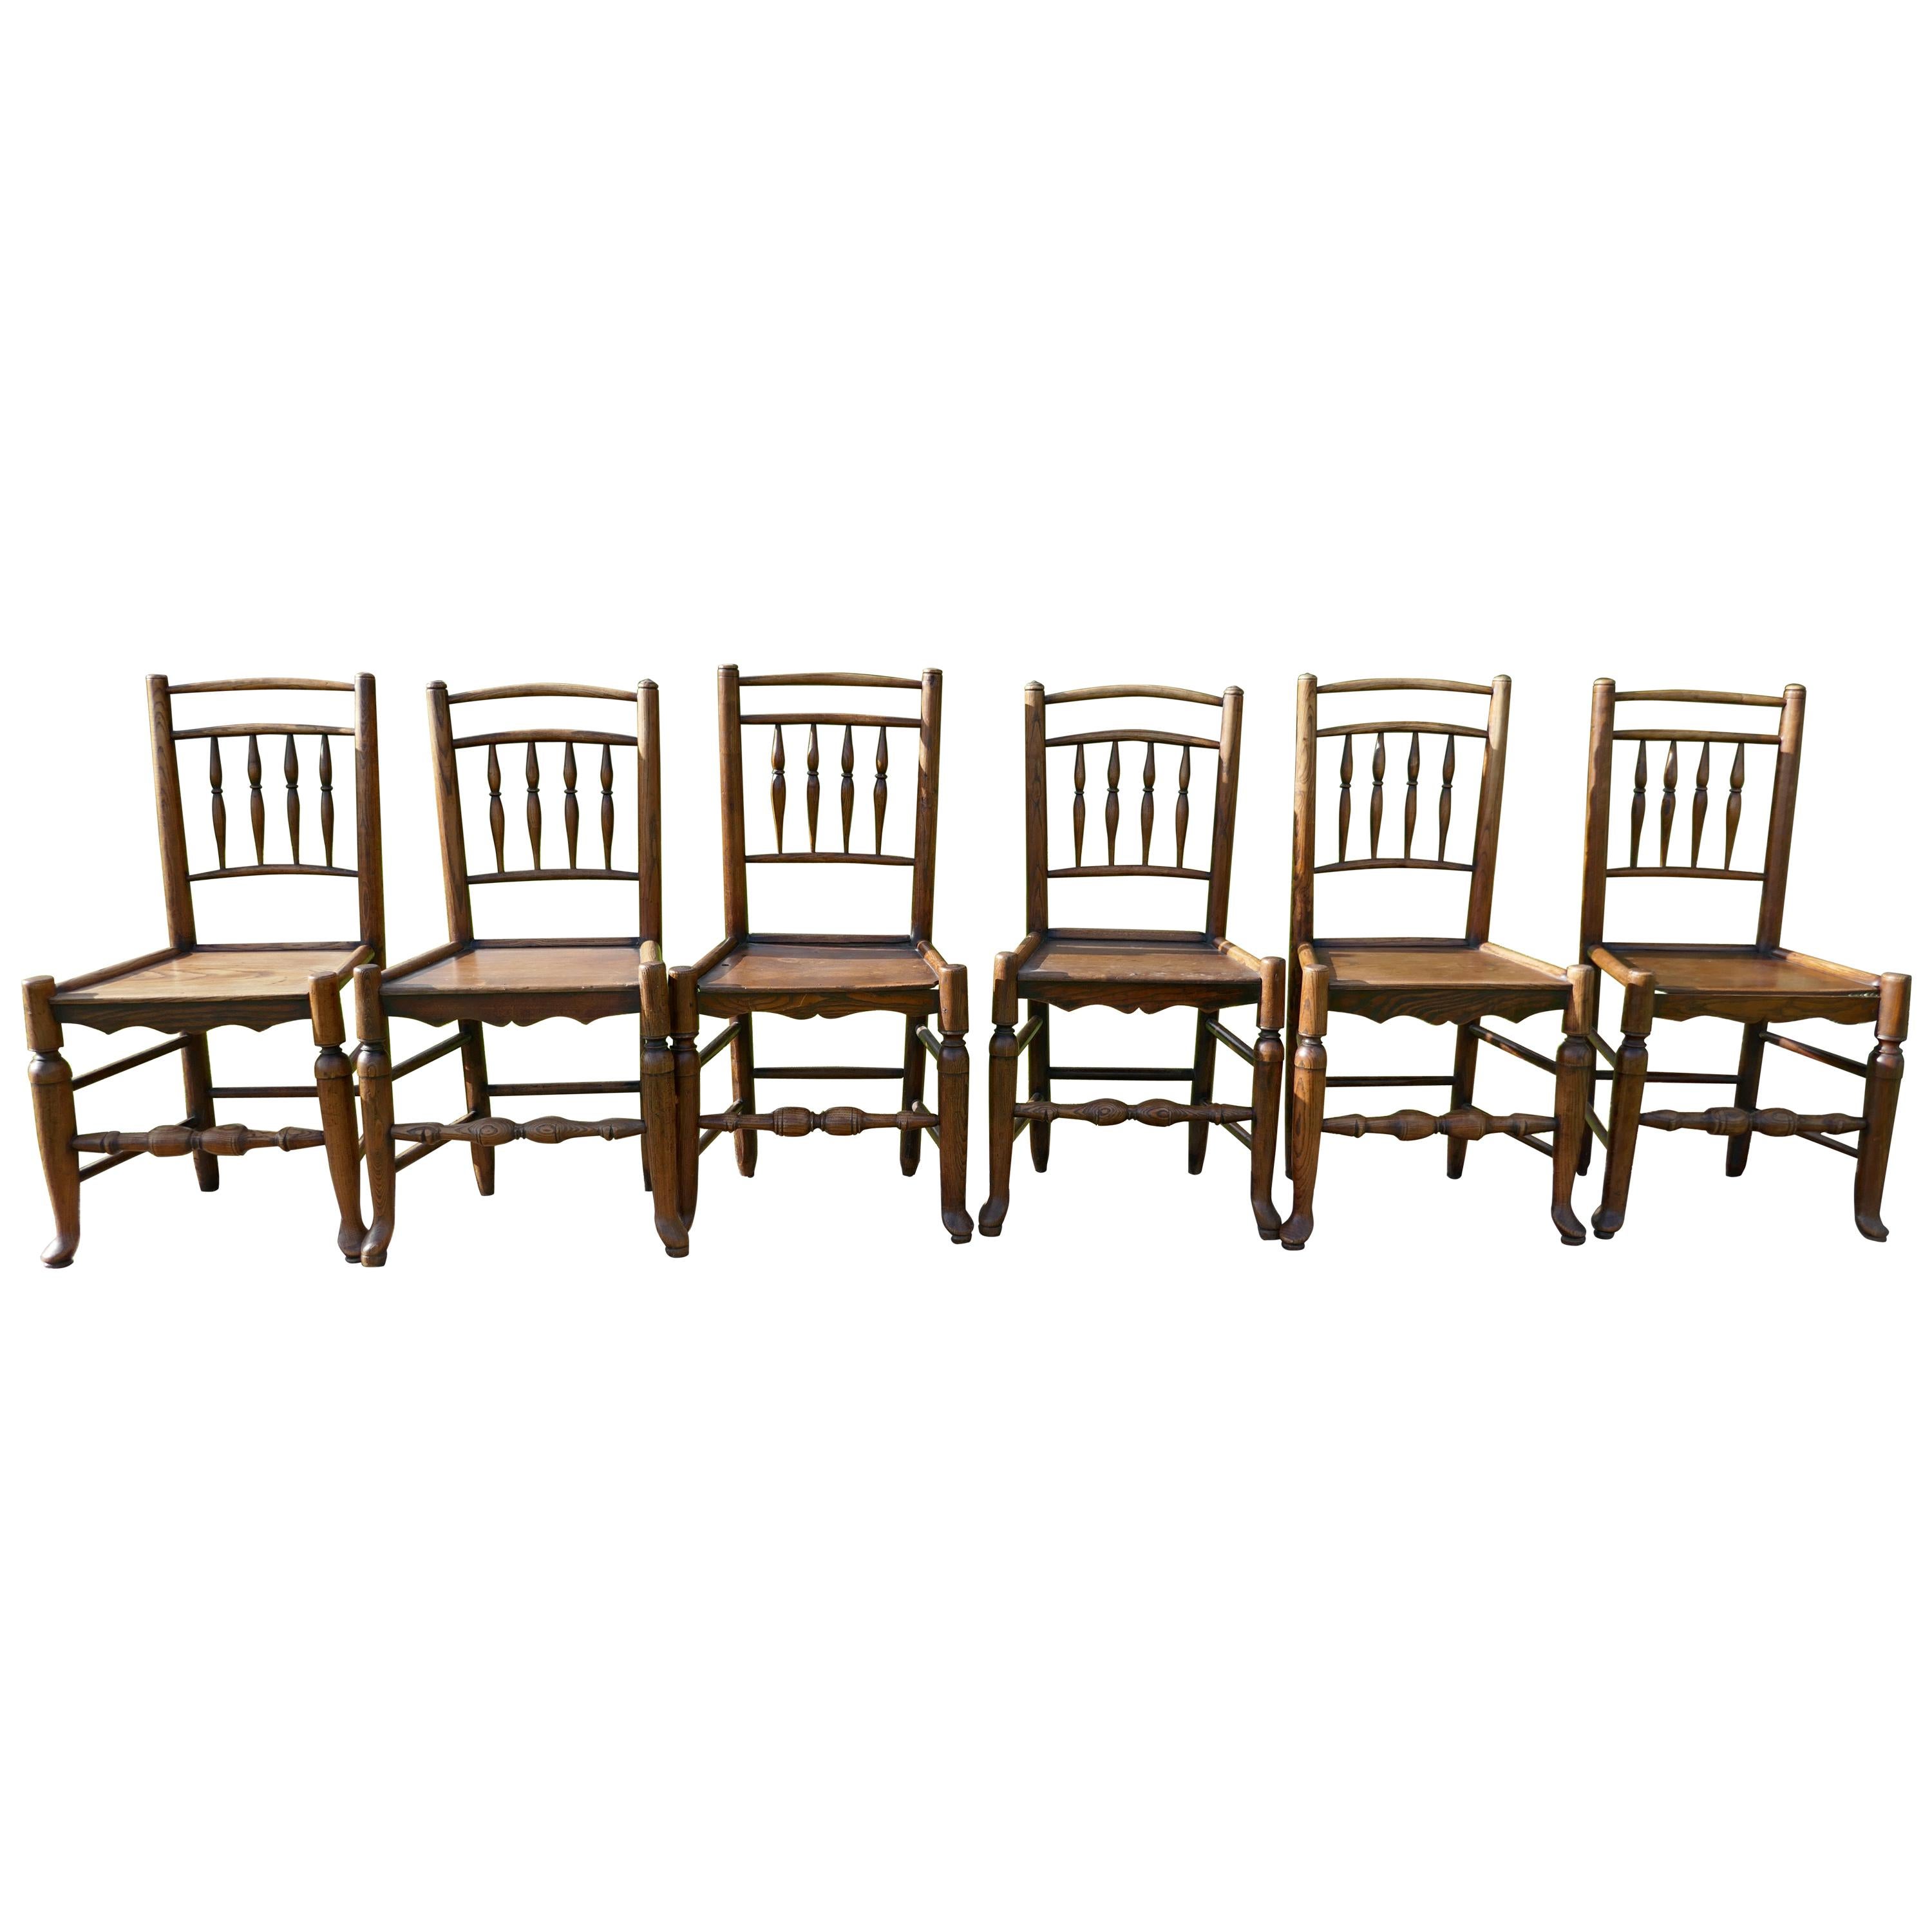 Set of 6 Early 19th Century Elm and Ash Country Chairs